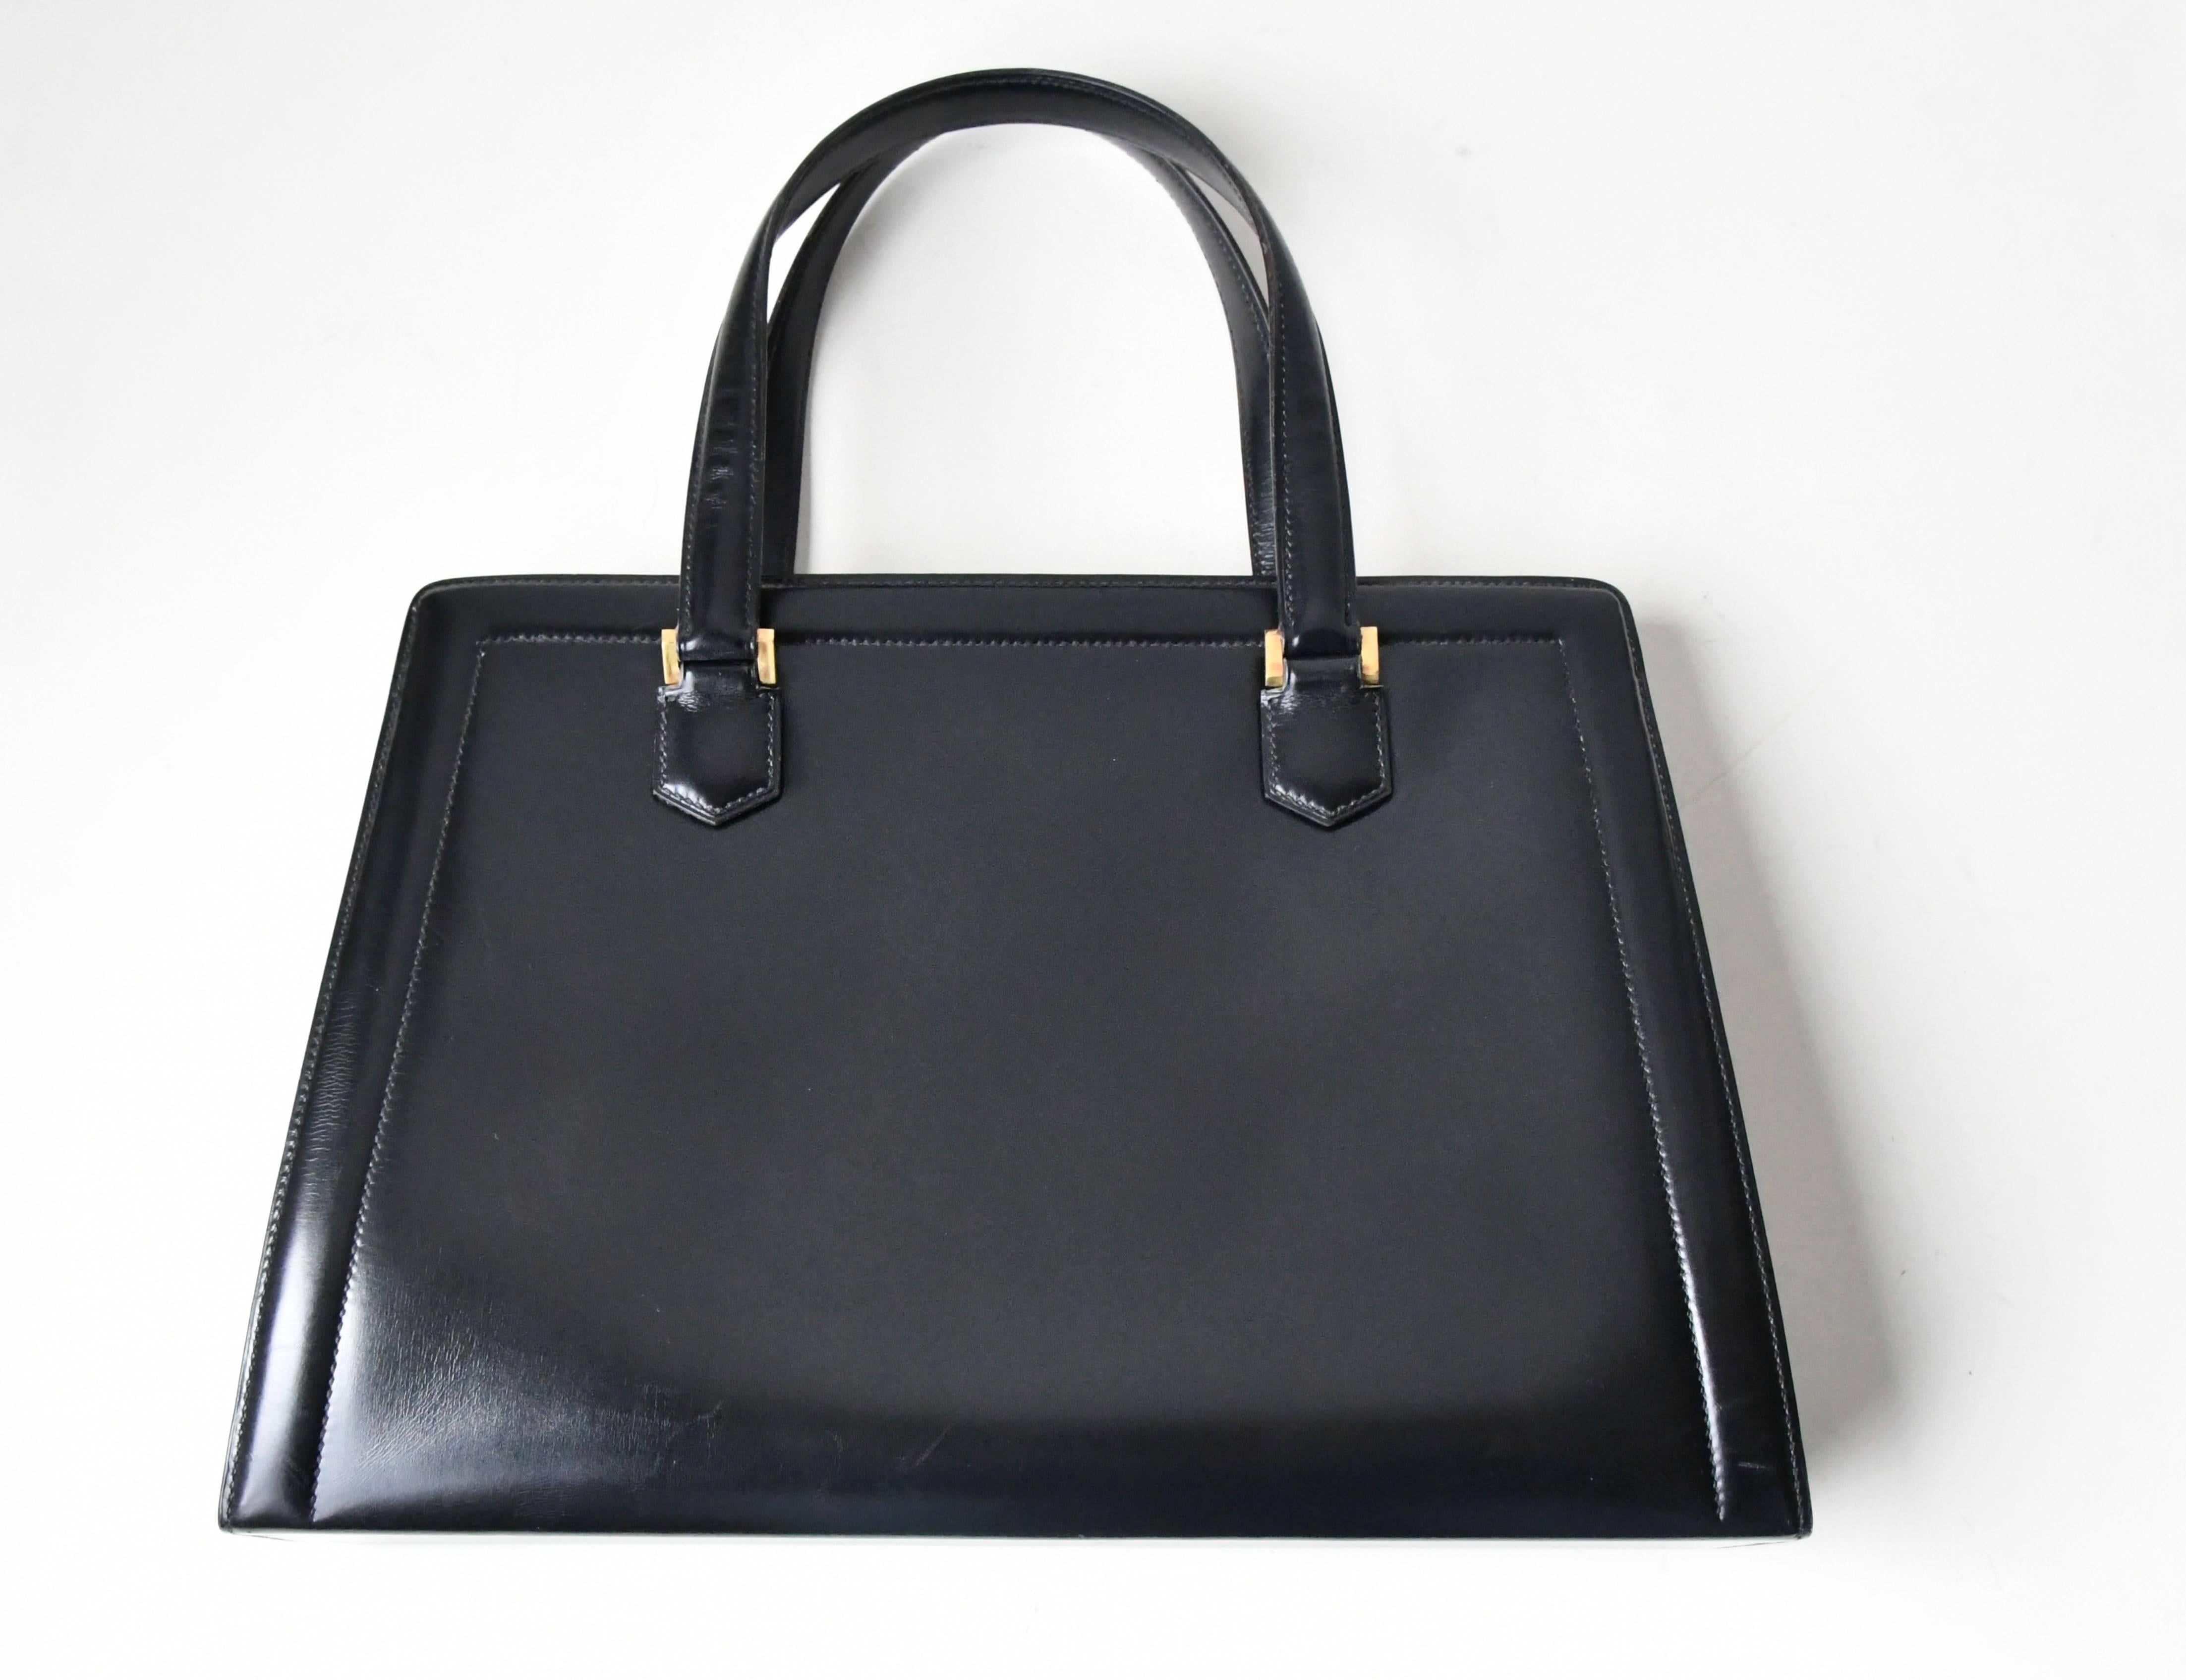 Hermes Black Bag, 1940s In Excellent Condition For Sale In Litchfield County, CT